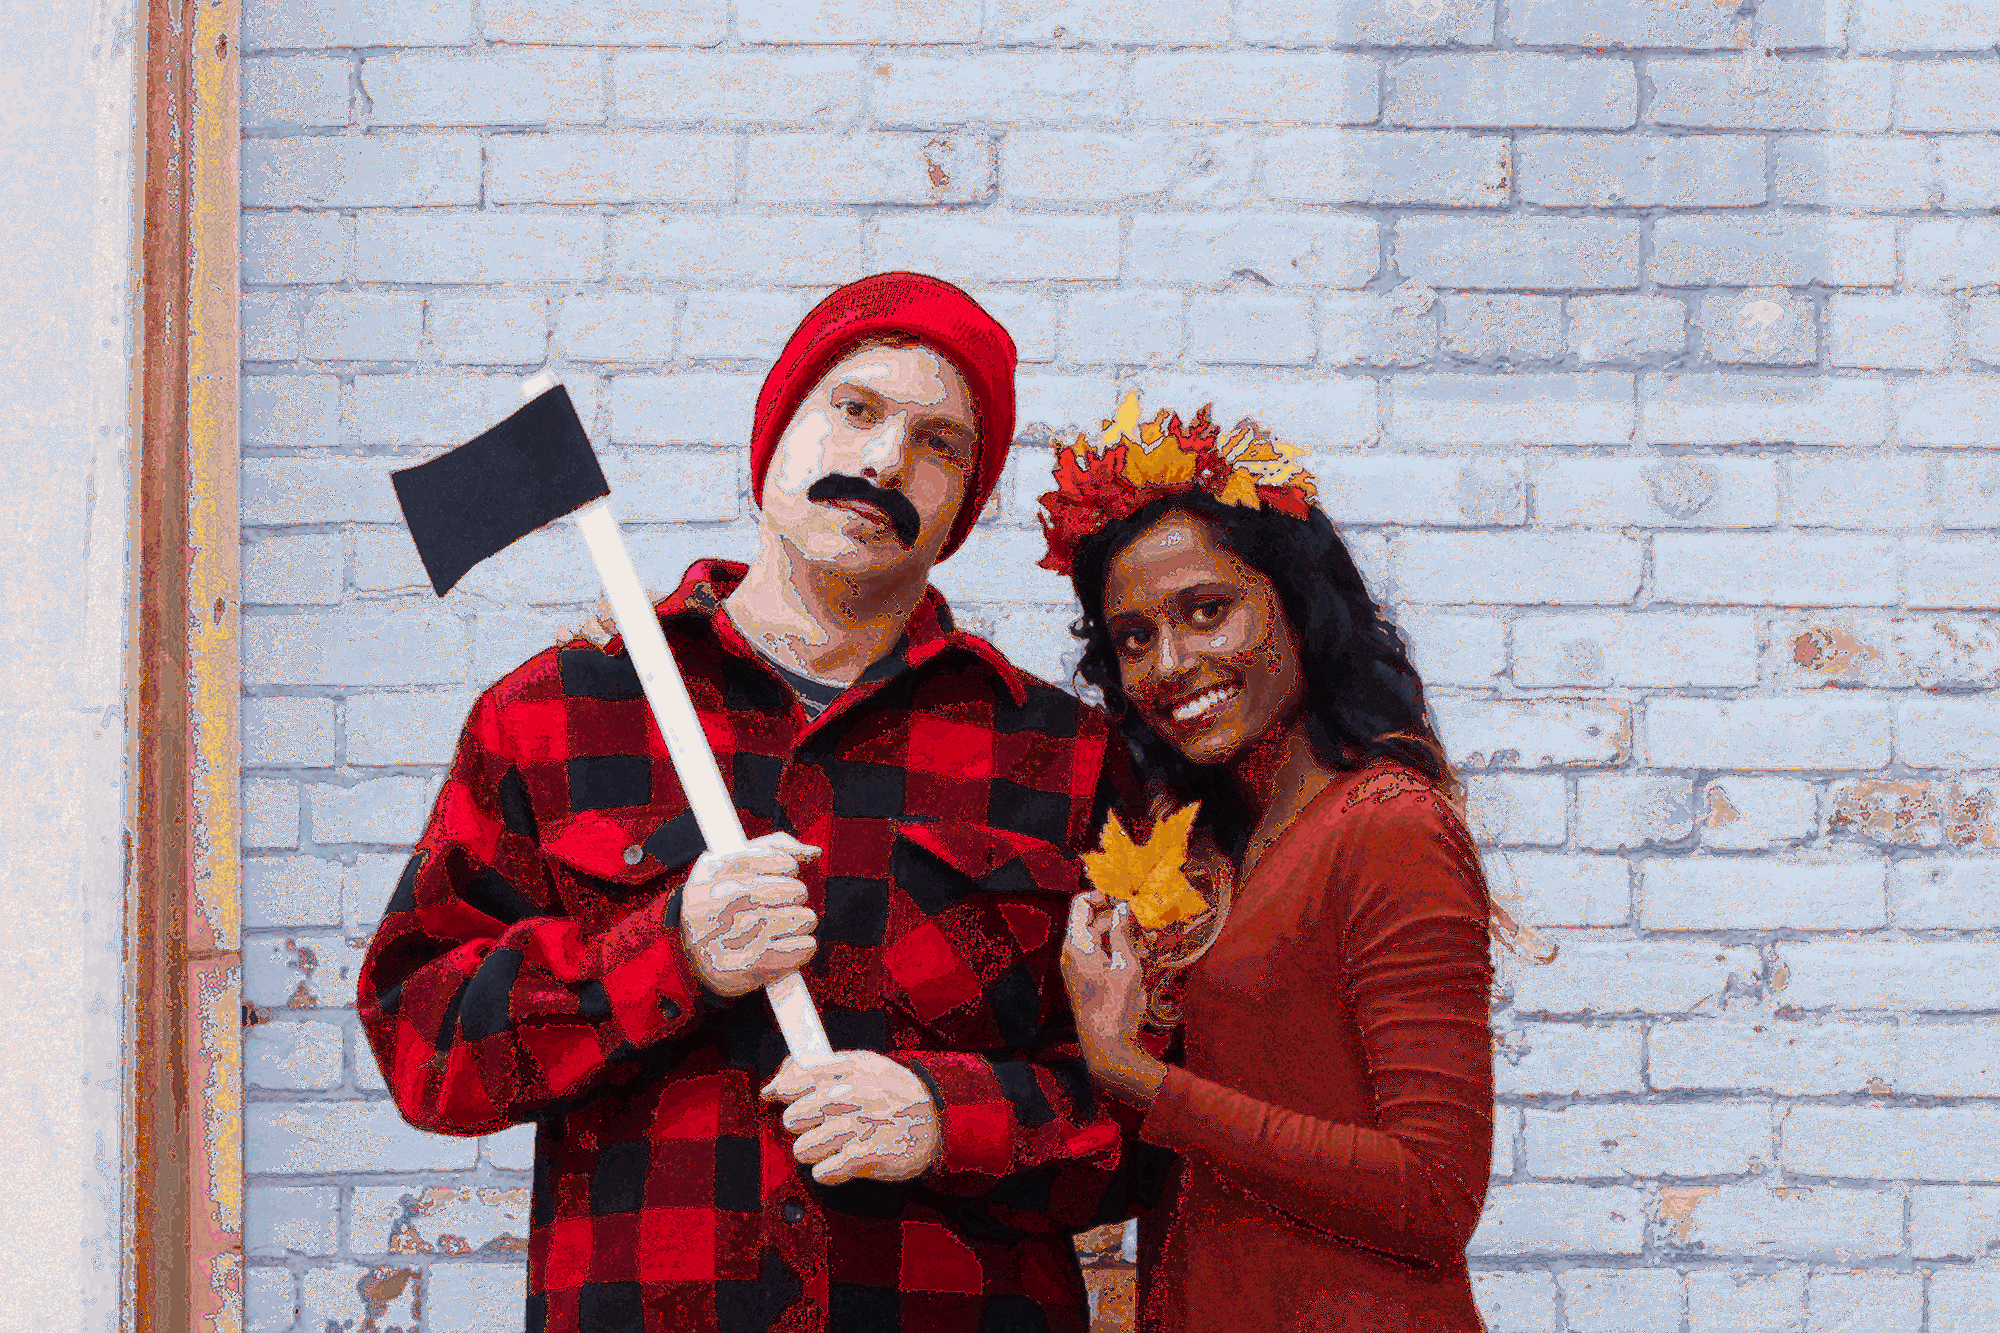 Easy couple costumes for halloween from fishandbull